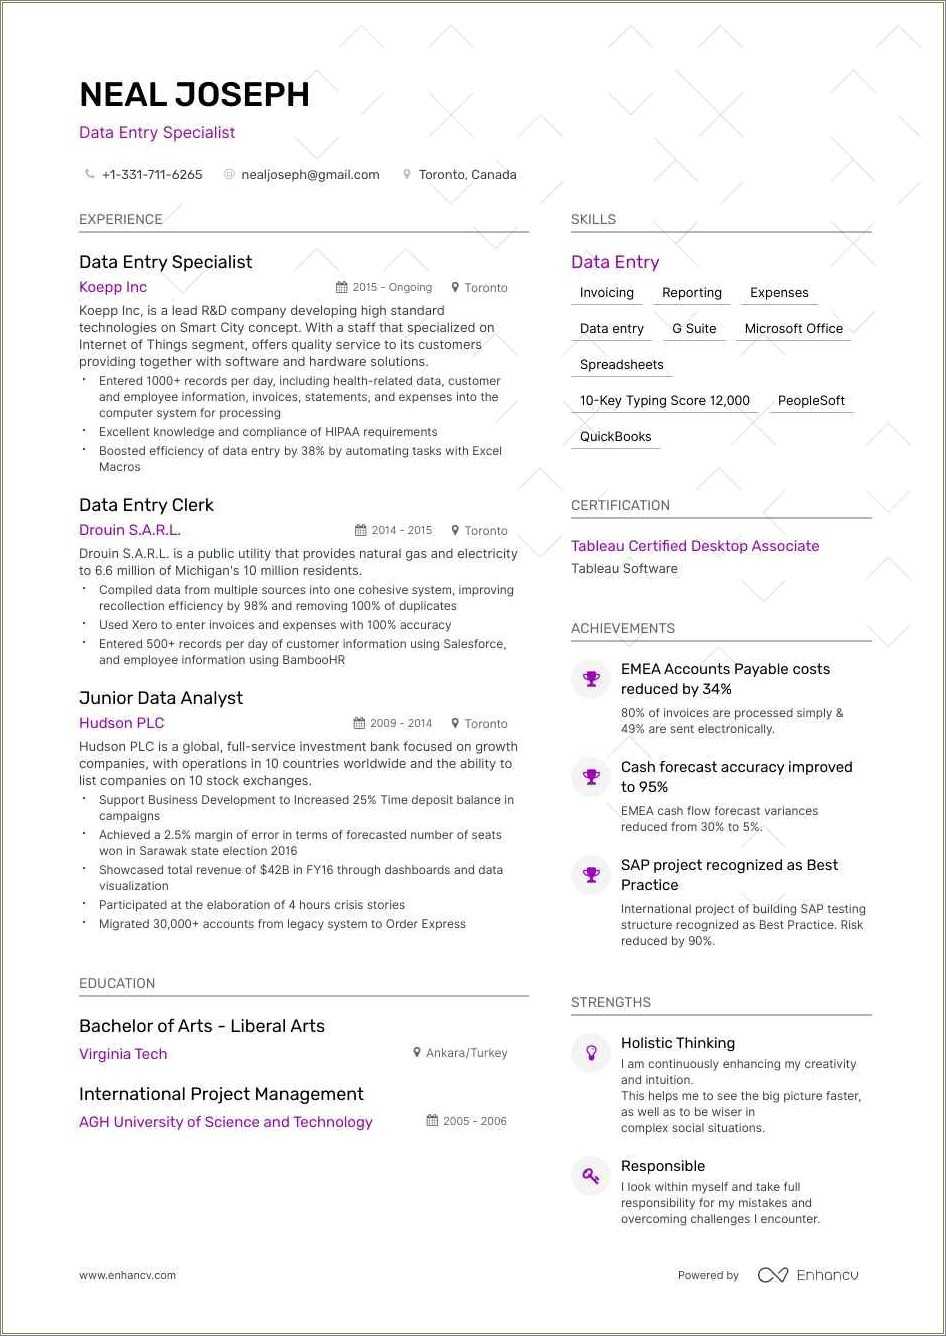 How To Write A Resume For Data Entry Jobs